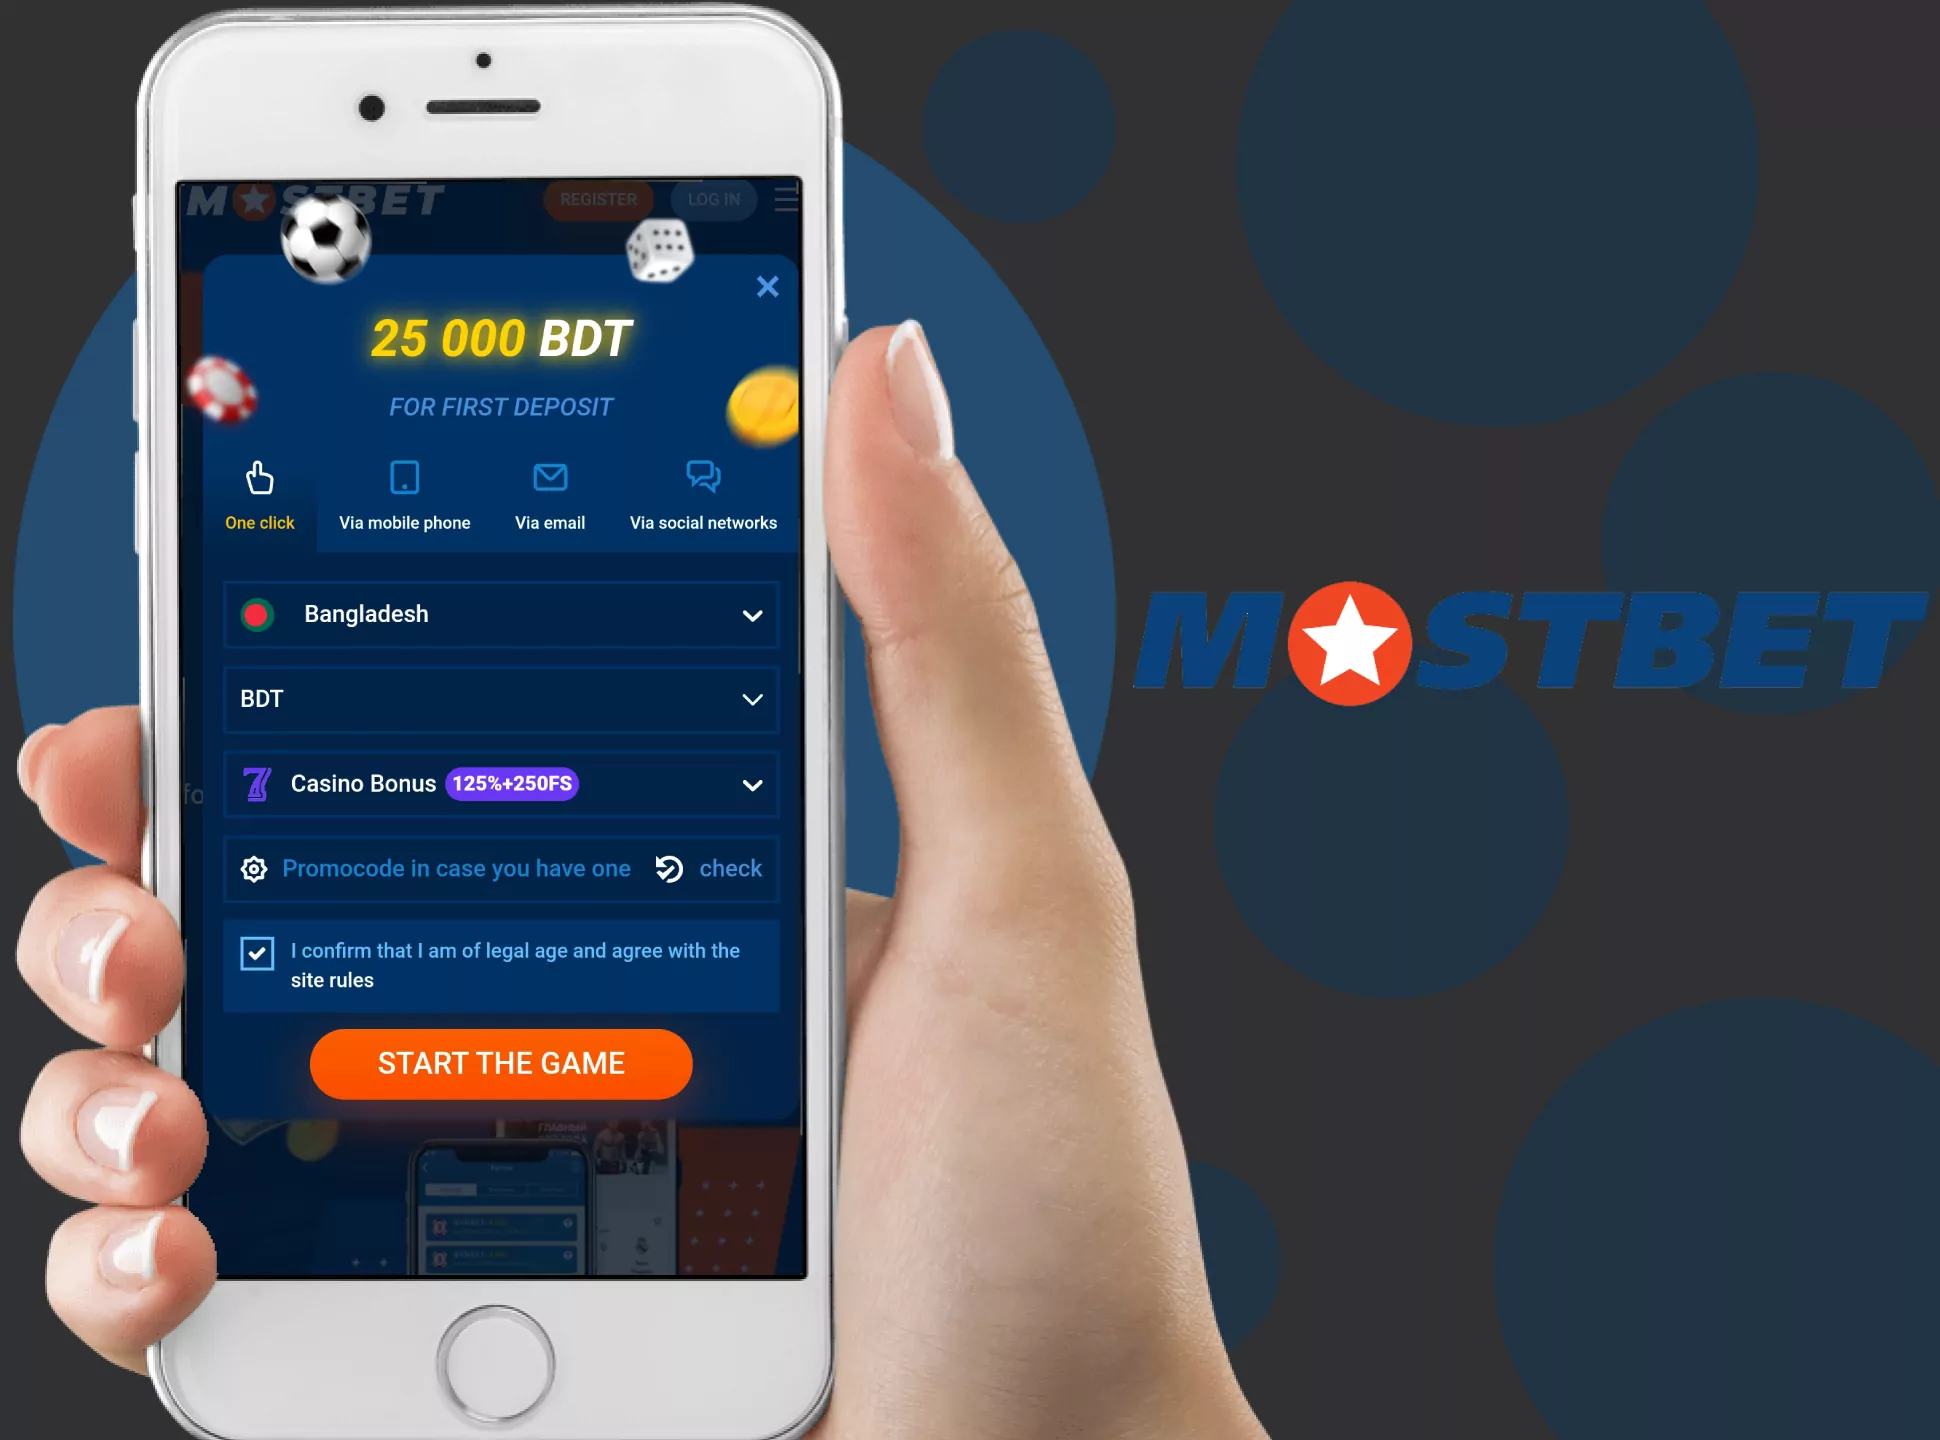 You can sign up for Mostbet in the mobile app.